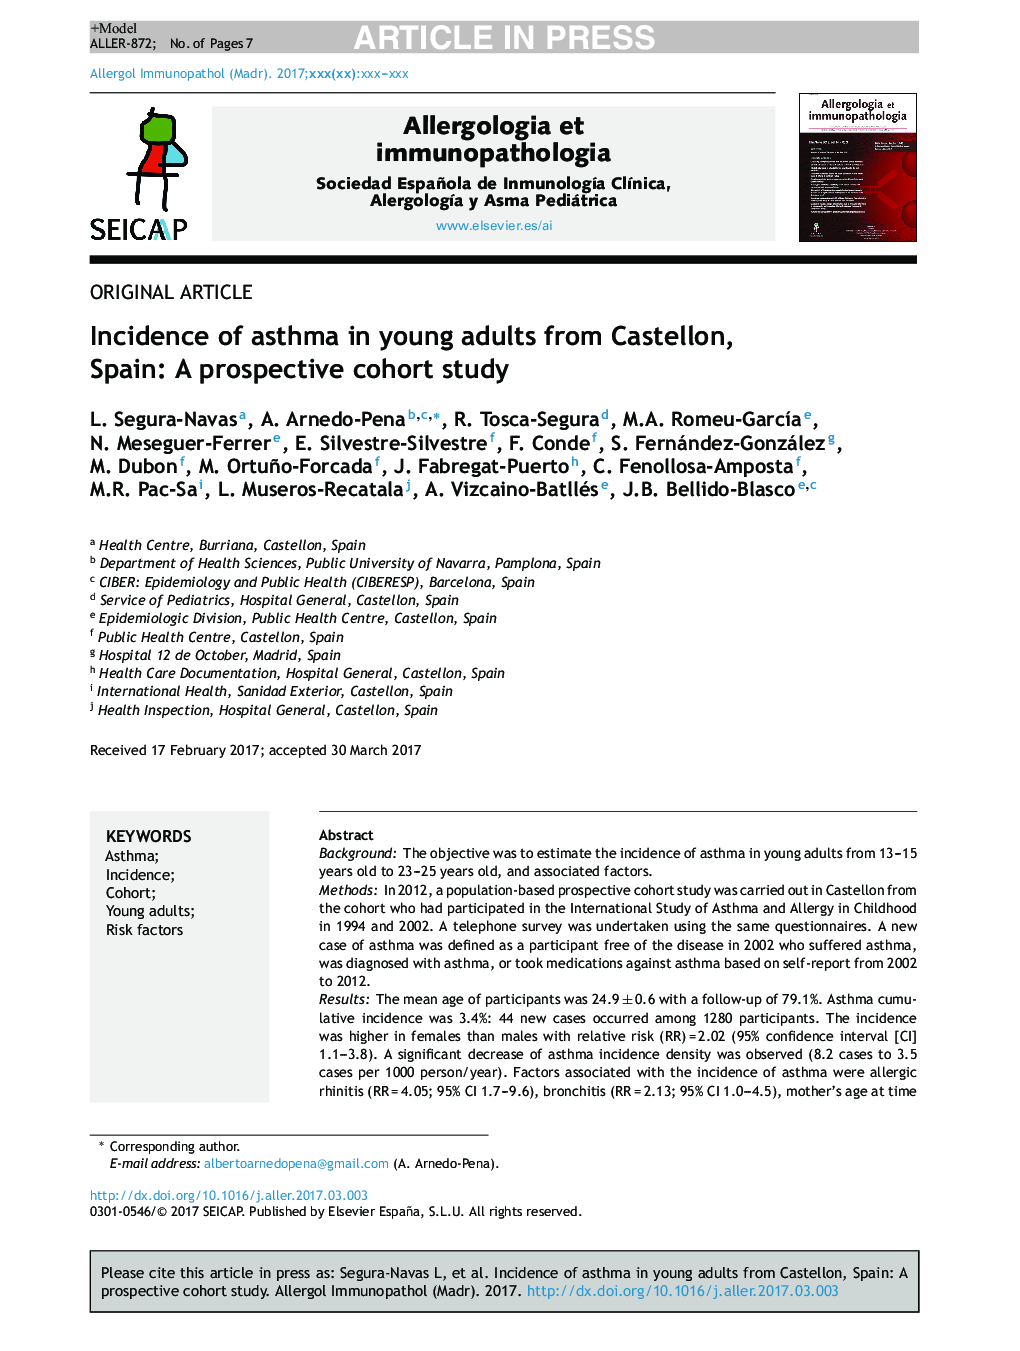 Incidence of asthma in young adults from Castellon, Spain: A prospective cohort study